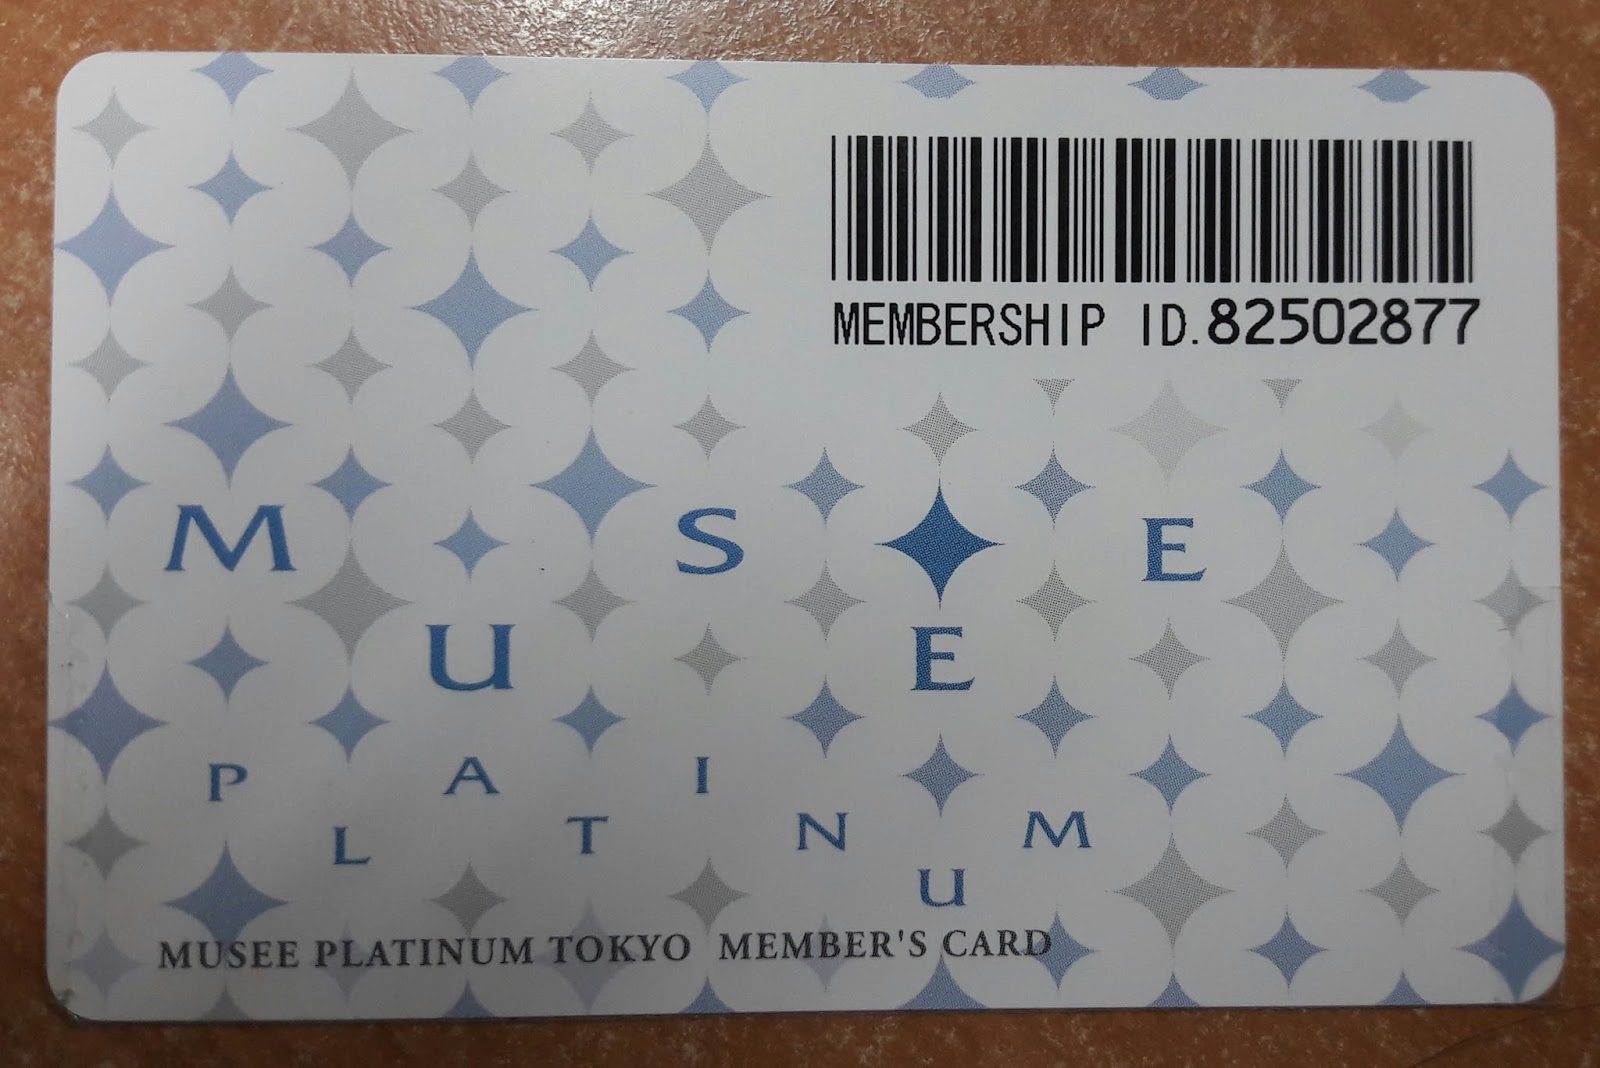 World of Review: [REVIEW] MUSEE PLATINUM TOKYO - Yesta's Review